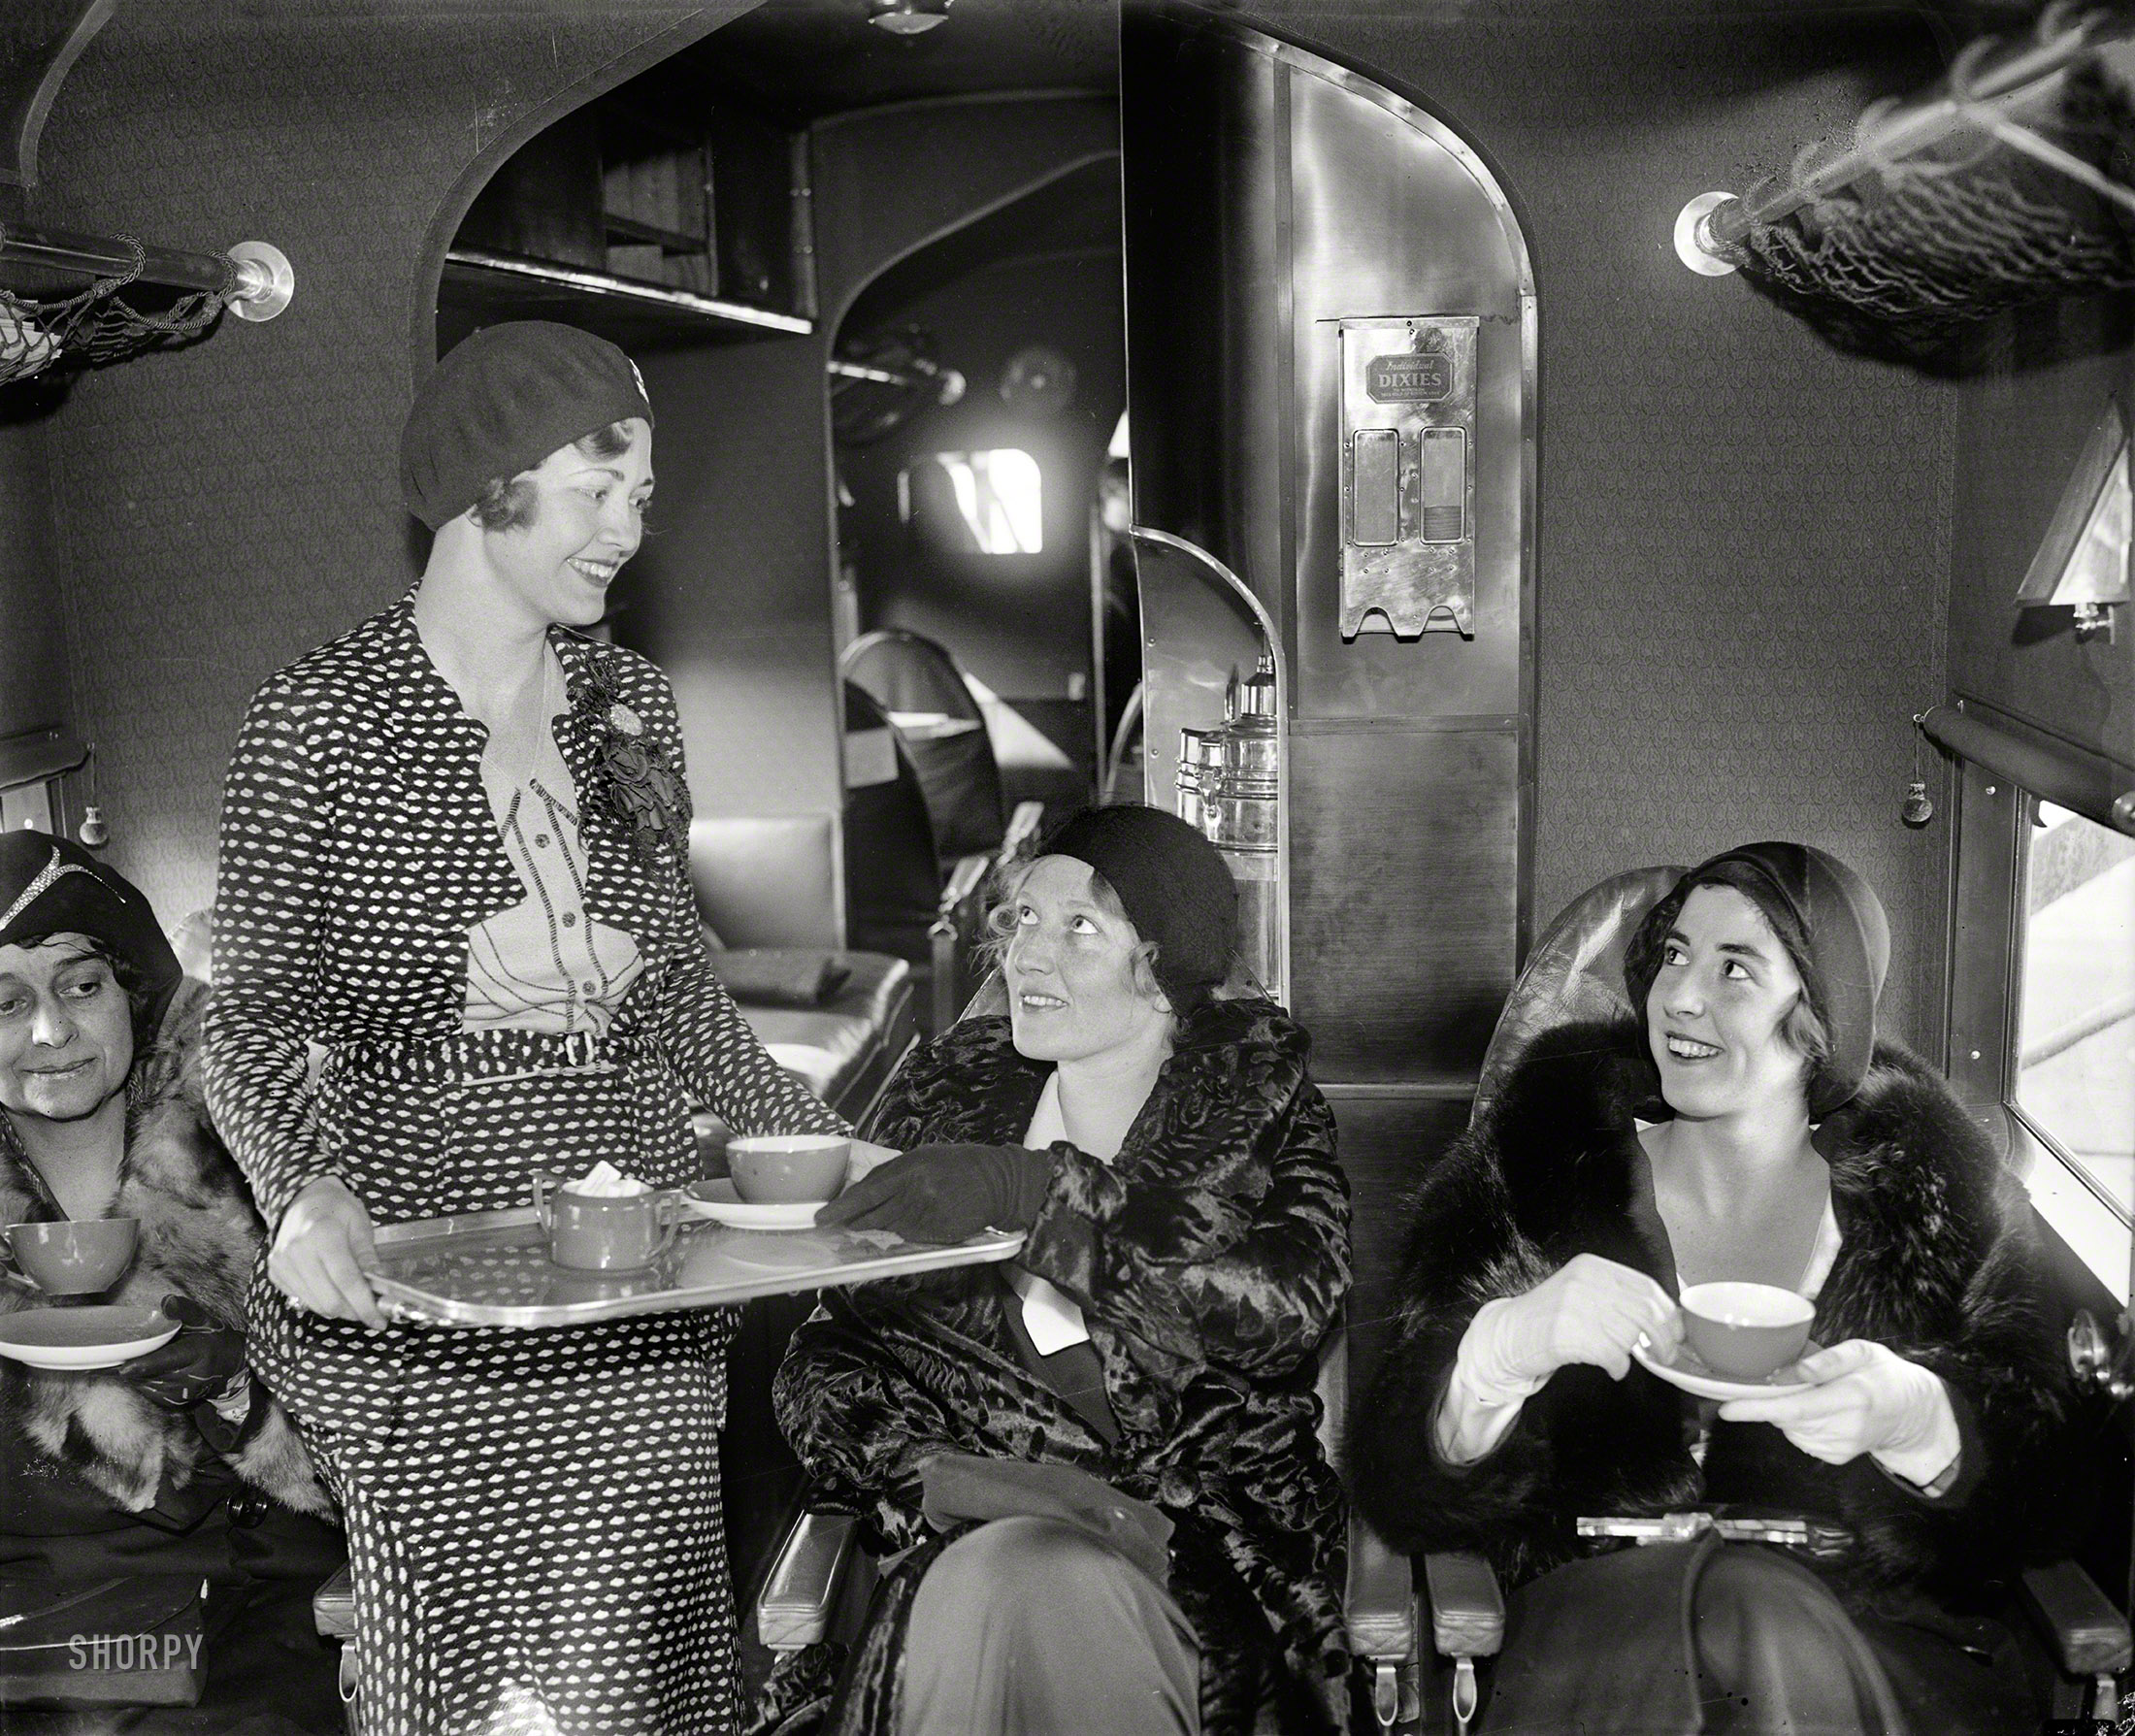 UPDATE: The photo now has a caption.

January 10, 1930. Tea time in the air. Miss Wanda Wood, hostess for the Eastern Air Transport, serves tea for two -- Misses Charlotte Childress and Elizabeth Hume, aboard one of the line's passenger planes. The company provides bridge, tea and cigarettes, with hostesses to arrange the bridge games and serve the tea.

We seem to be aboard an aircraft in this unlabeled glass negative from the Harris & Ewing collection. Beverage service uses real china as well as "Individual Dixies." Who can identify these ladies' means of conveyance? View full size.